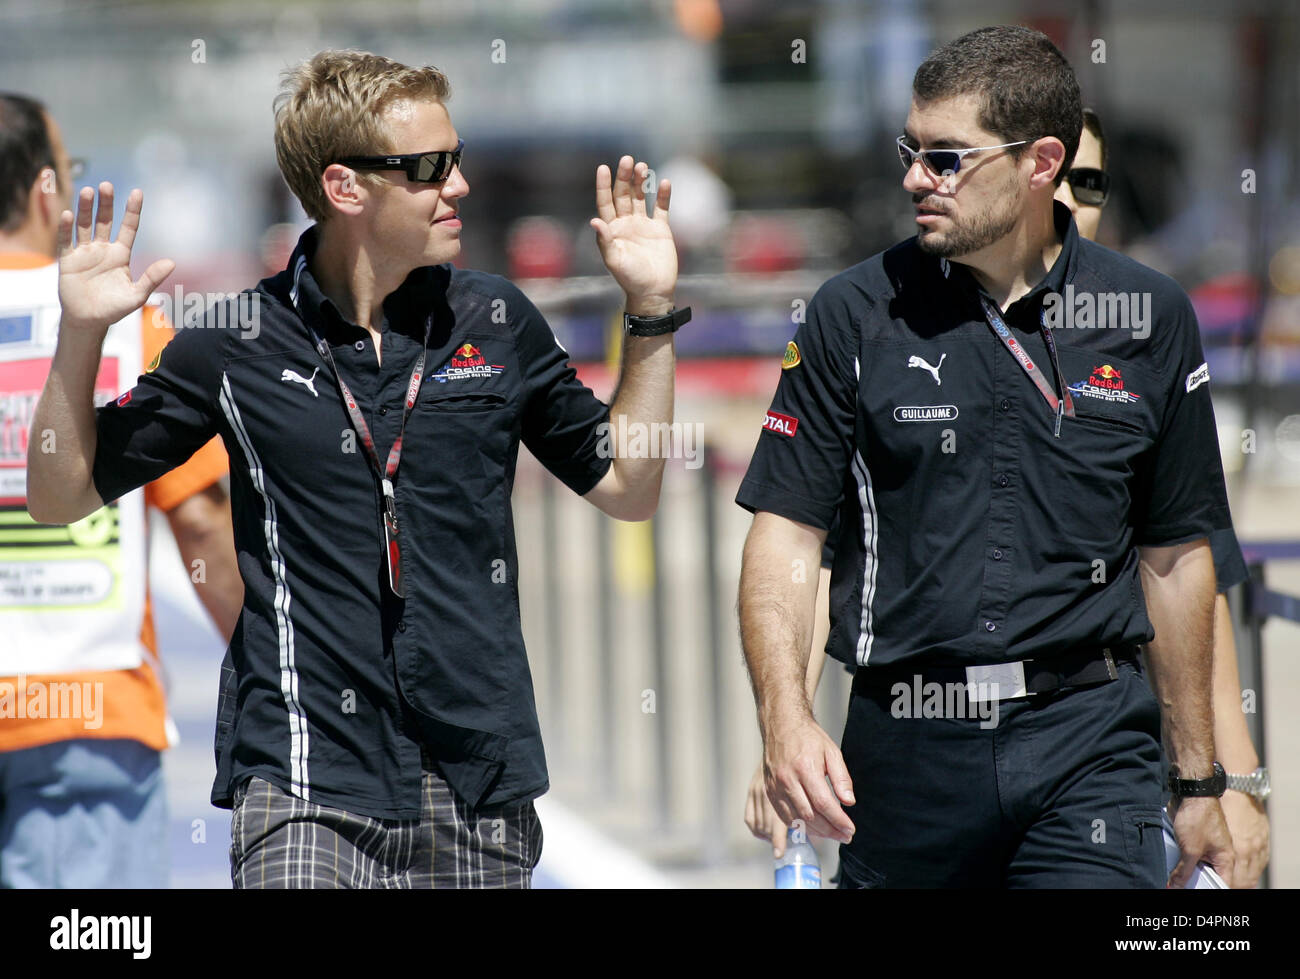 German Formula One driver Sebastian Vettel (L) and engineer Guillaume Rocquelin of Red Bull Racing inspect the Valencia Street Circuit in Valencia, Spain, 20 August 2009. The Grand Prix of Europe will take place on Sunday, 23 August 2009. Photo: Felix Heyder Stock Photo